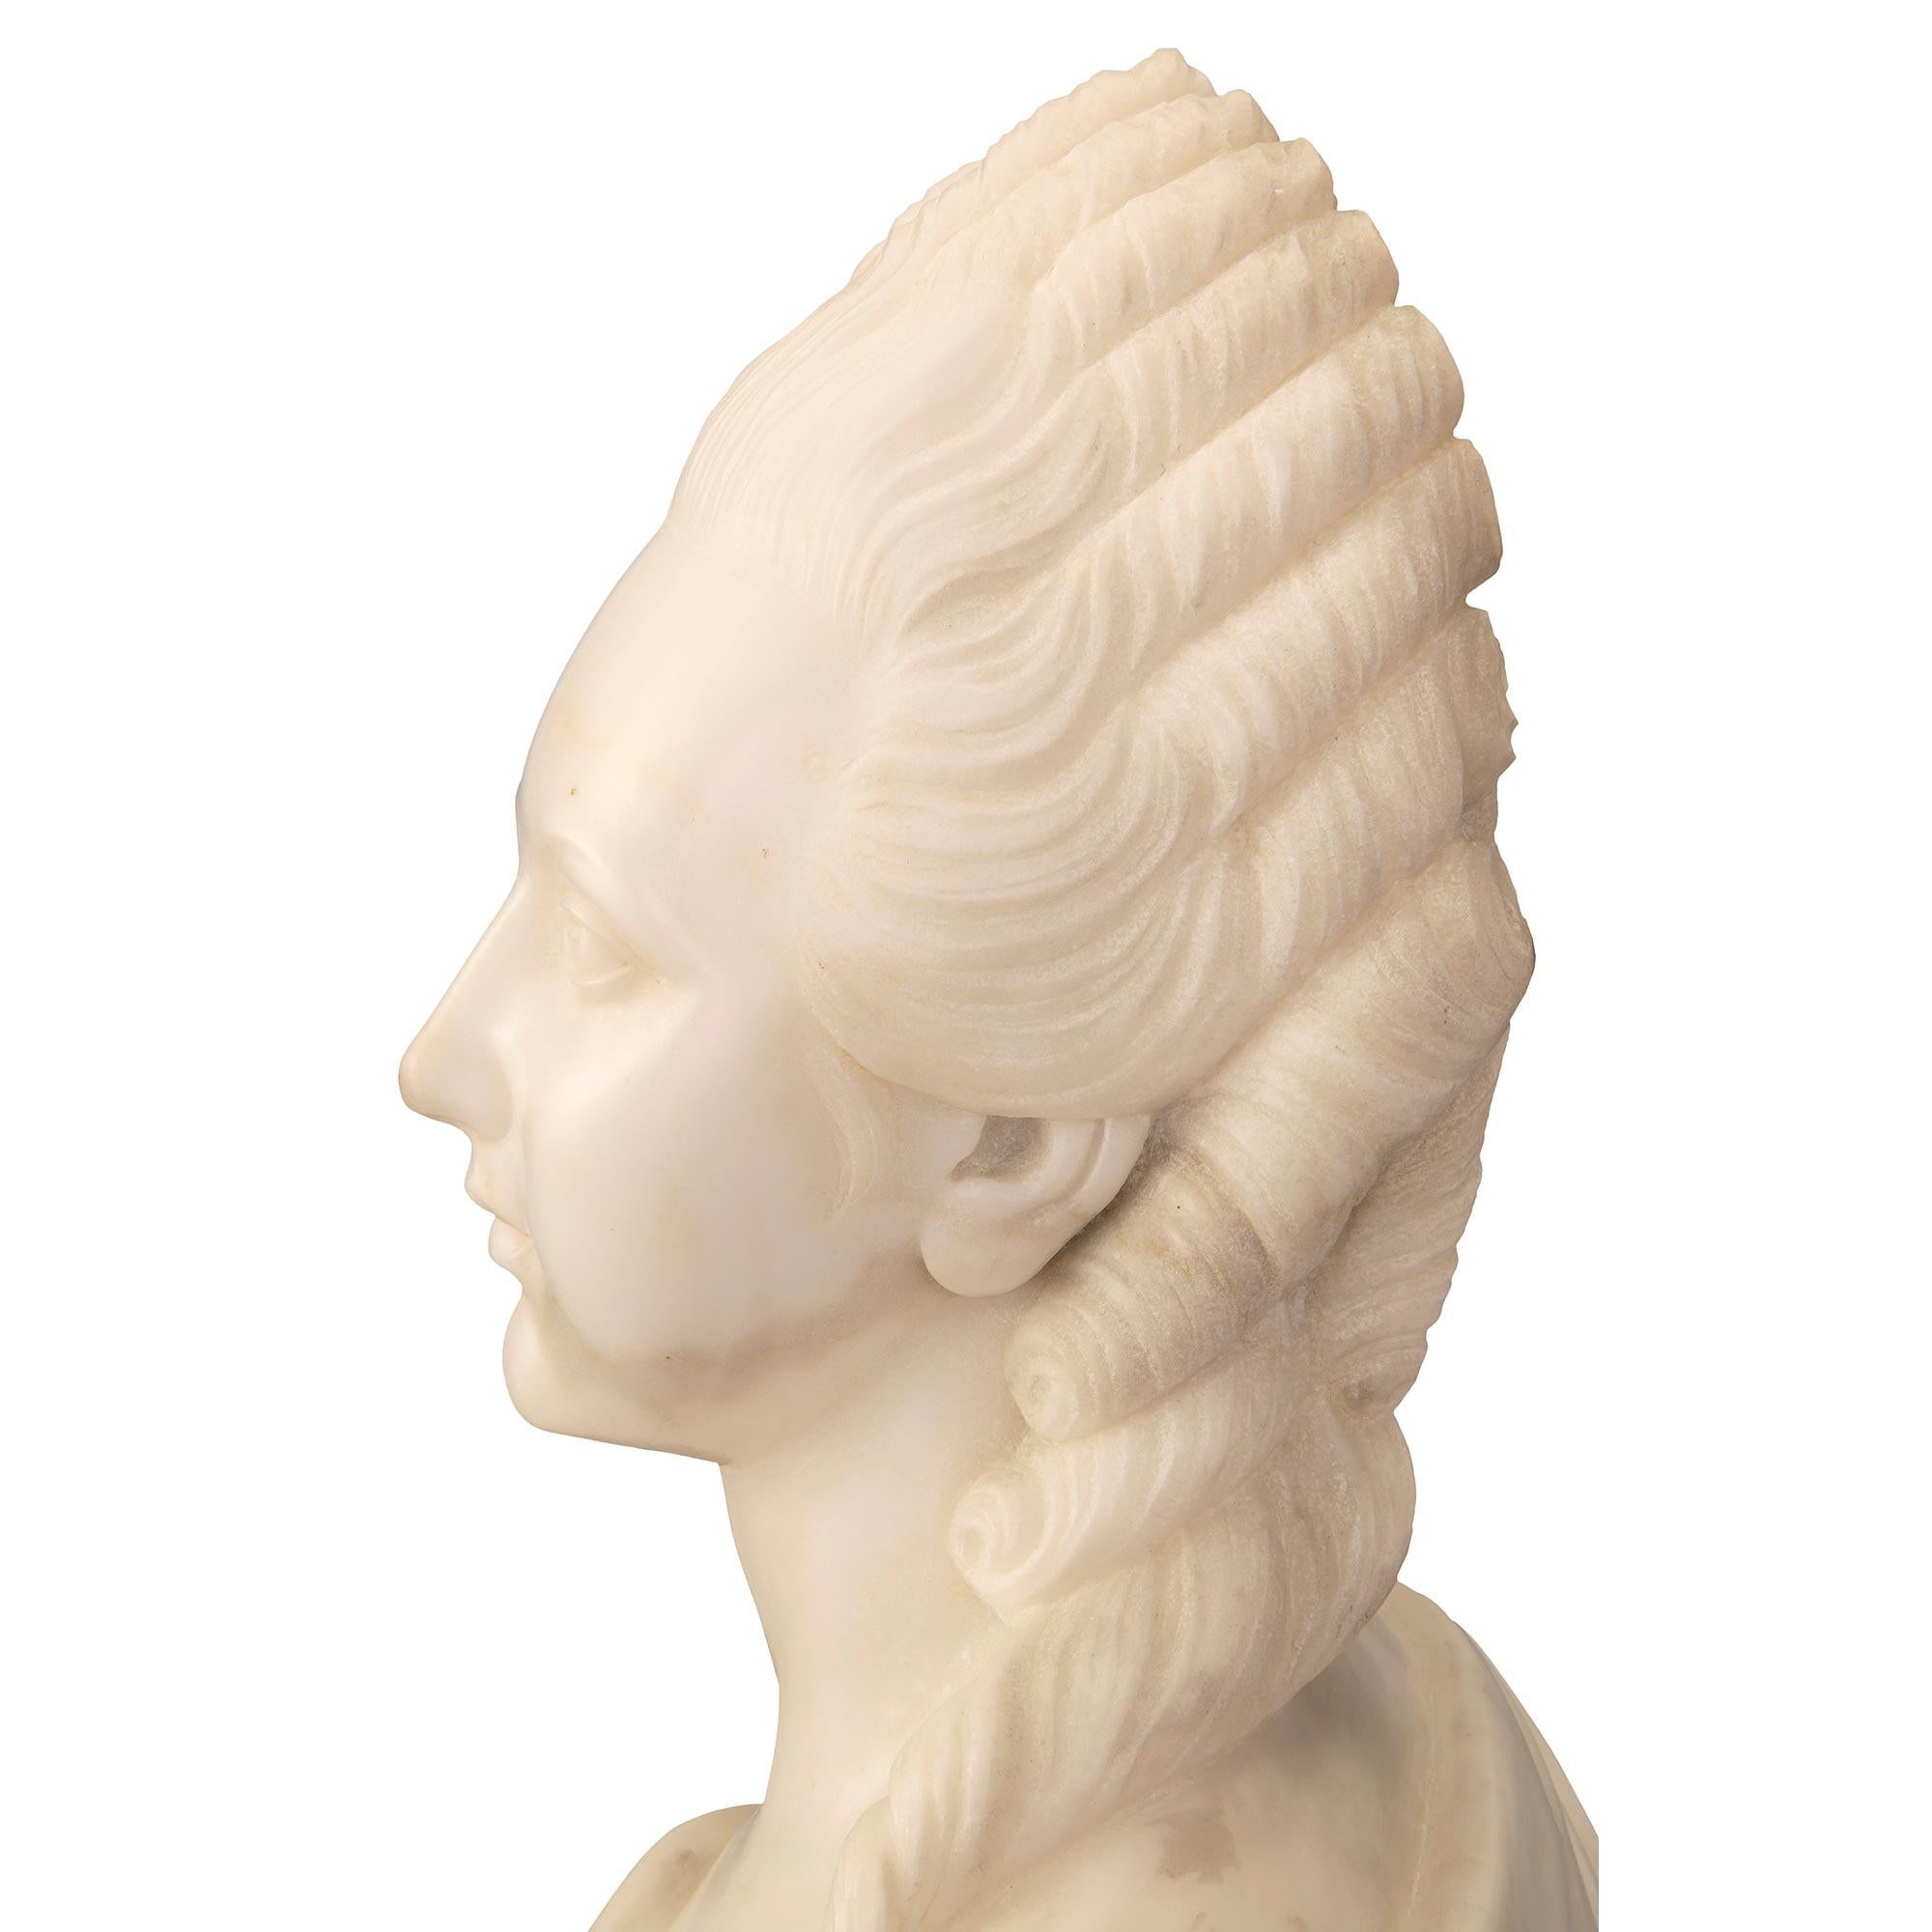 French 19th Century White Carrara Marble Bust of Marie Antoinette For Sale 3